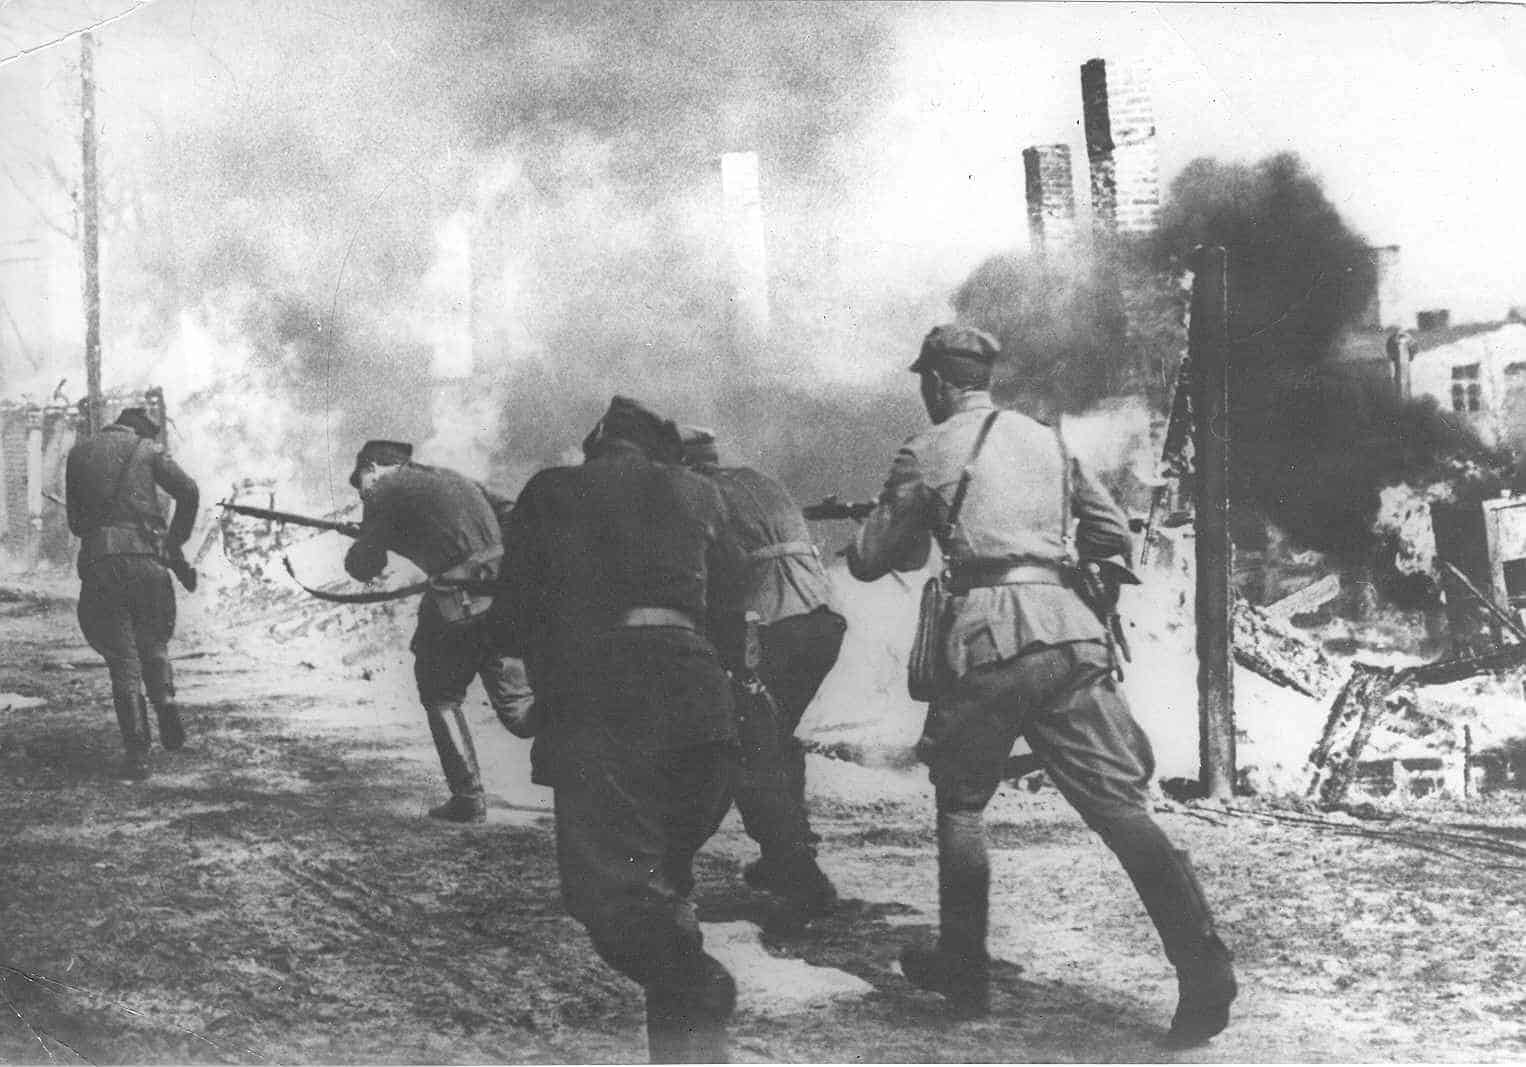 Much of the fighting on May 1st 1945 in the western areas of Berlin was conducted by Polish infantry units